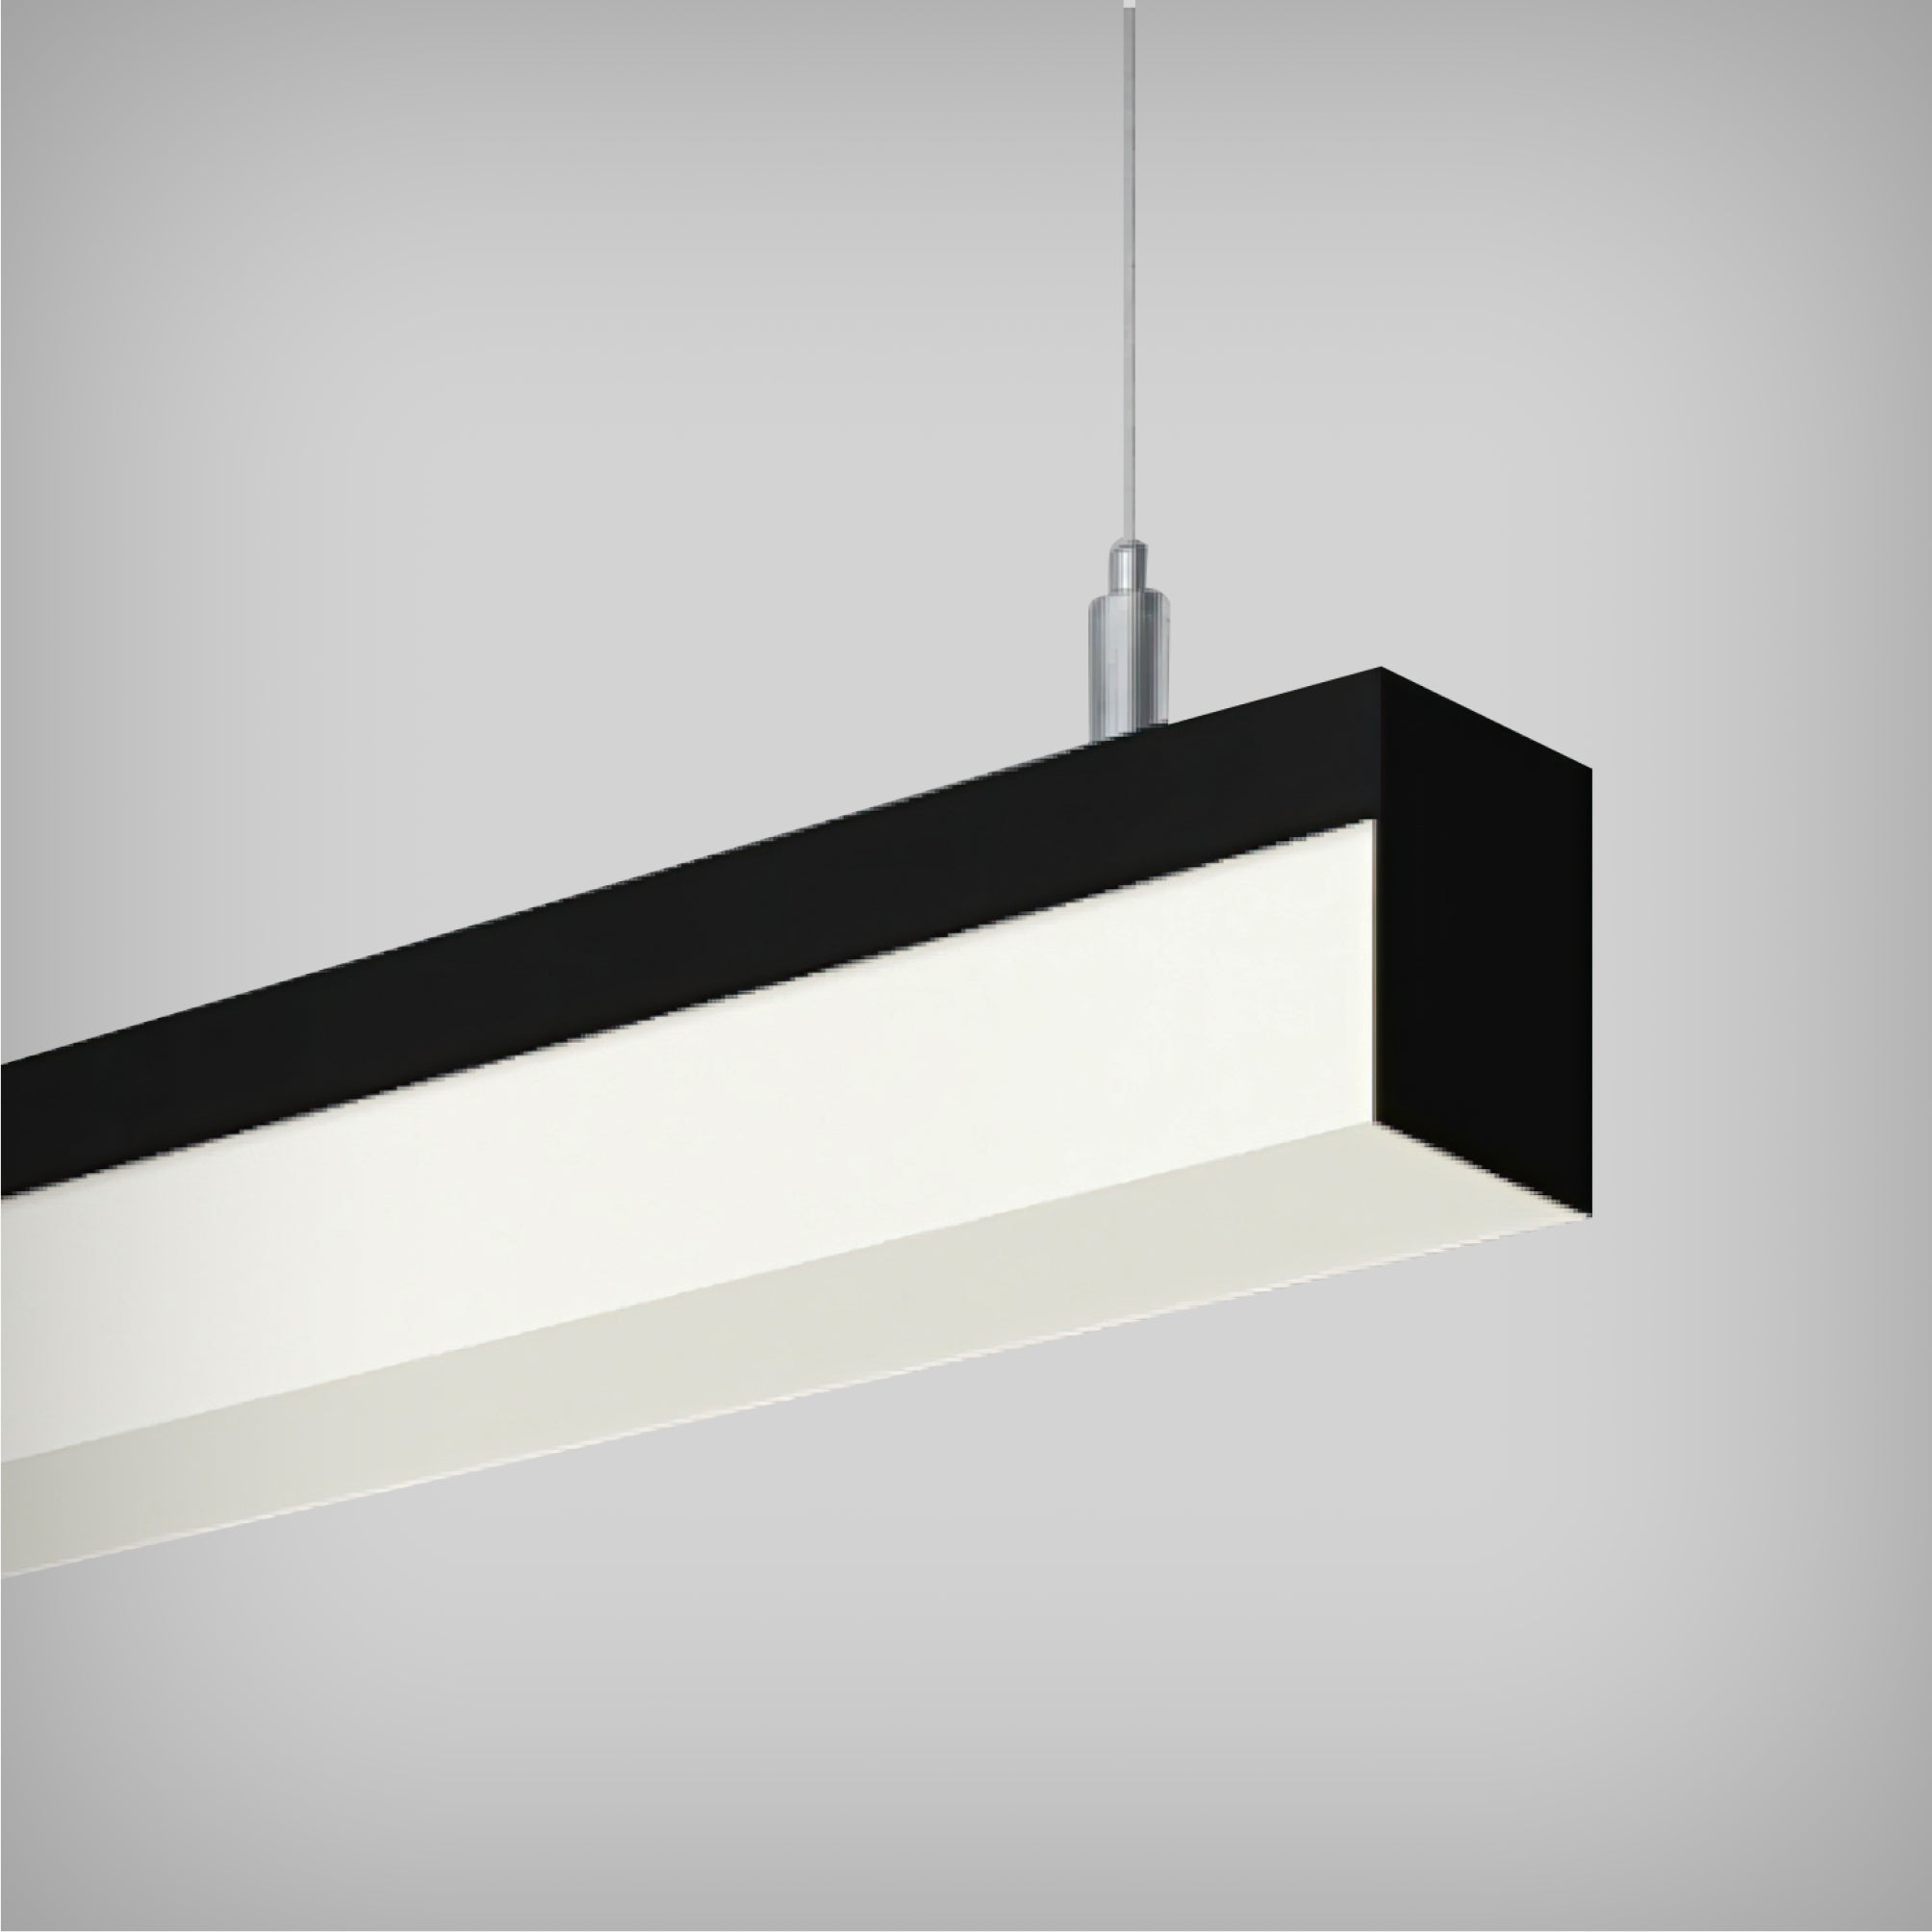 Slim LED Linear Pendant Light with a 0.8-Inch Design